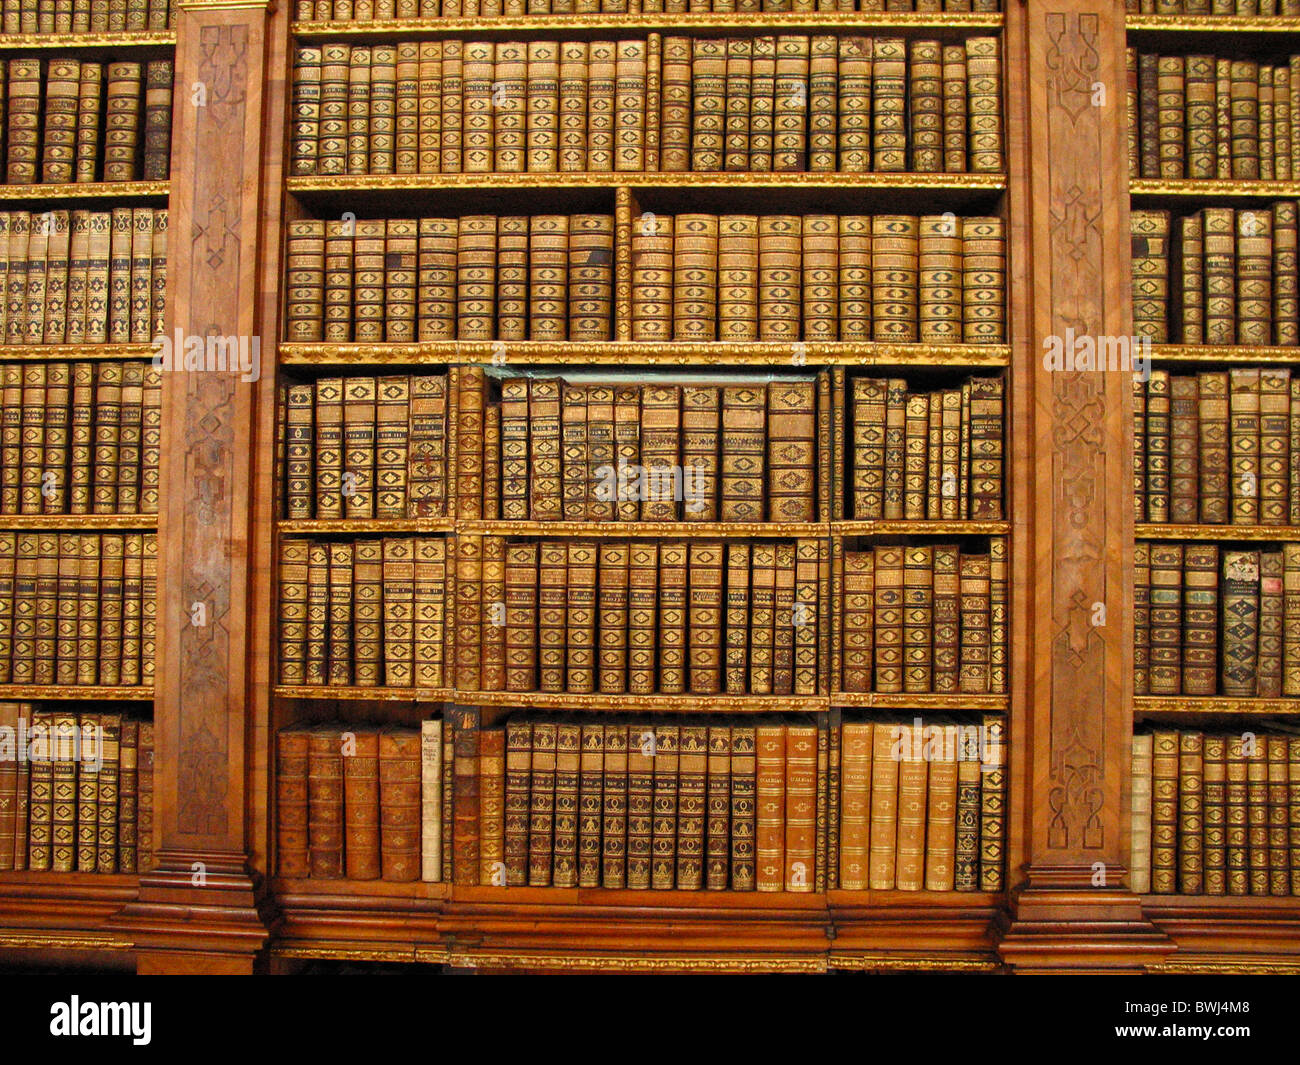 library old books volumes old historical shelves literature reading knowledge education formation Stock Photo